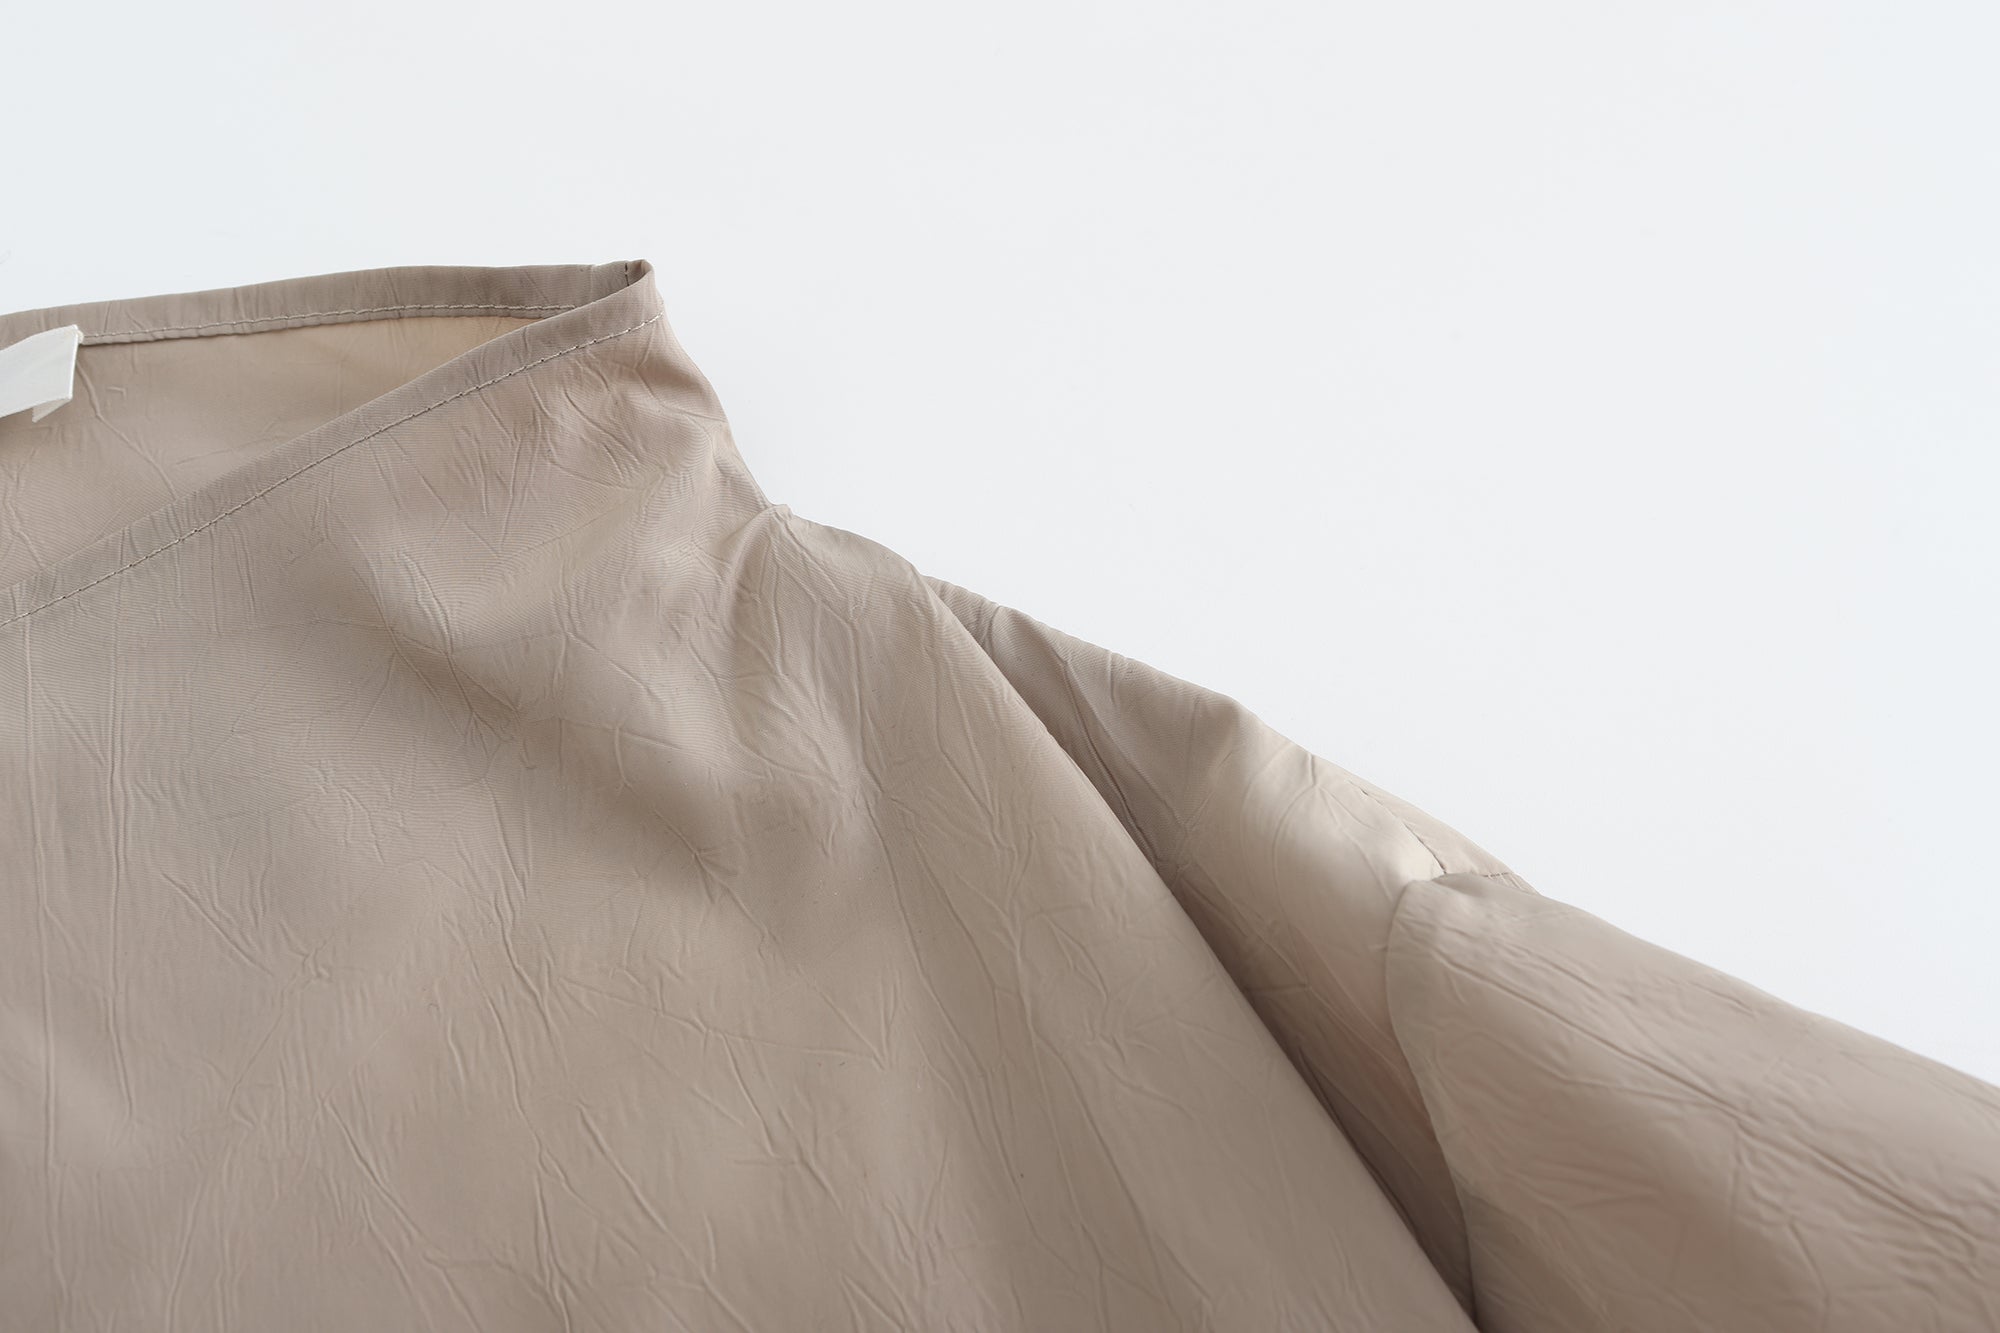 SS24 - SAND LINEAR TRENCH COAT